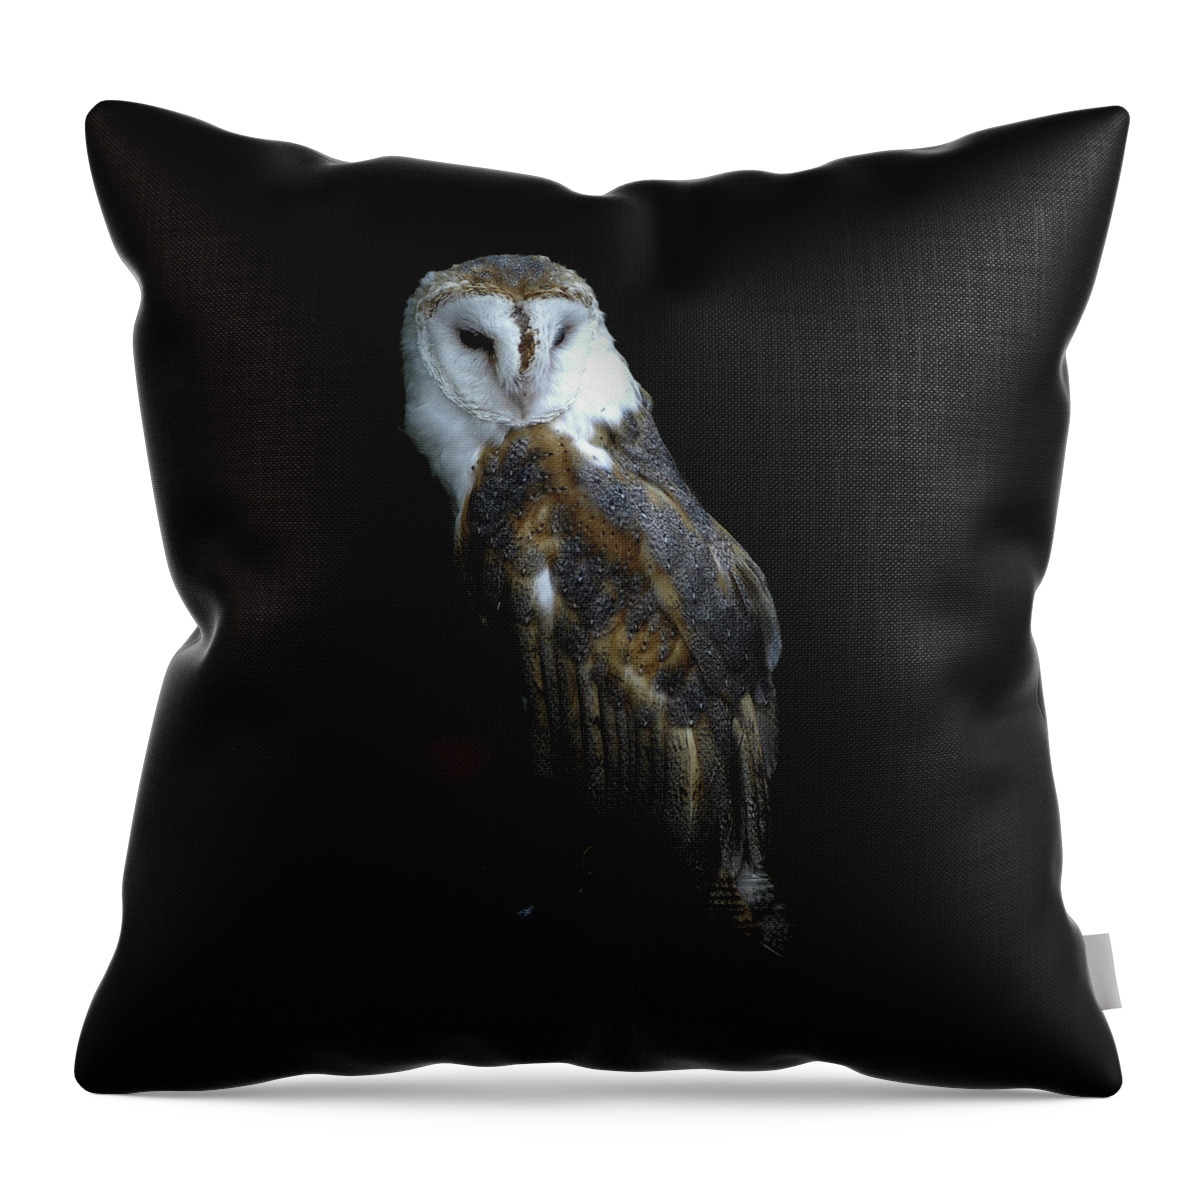 Owl Throw Pillow featuring the photograph Barn Owl Against a Black Background by James C Richardson